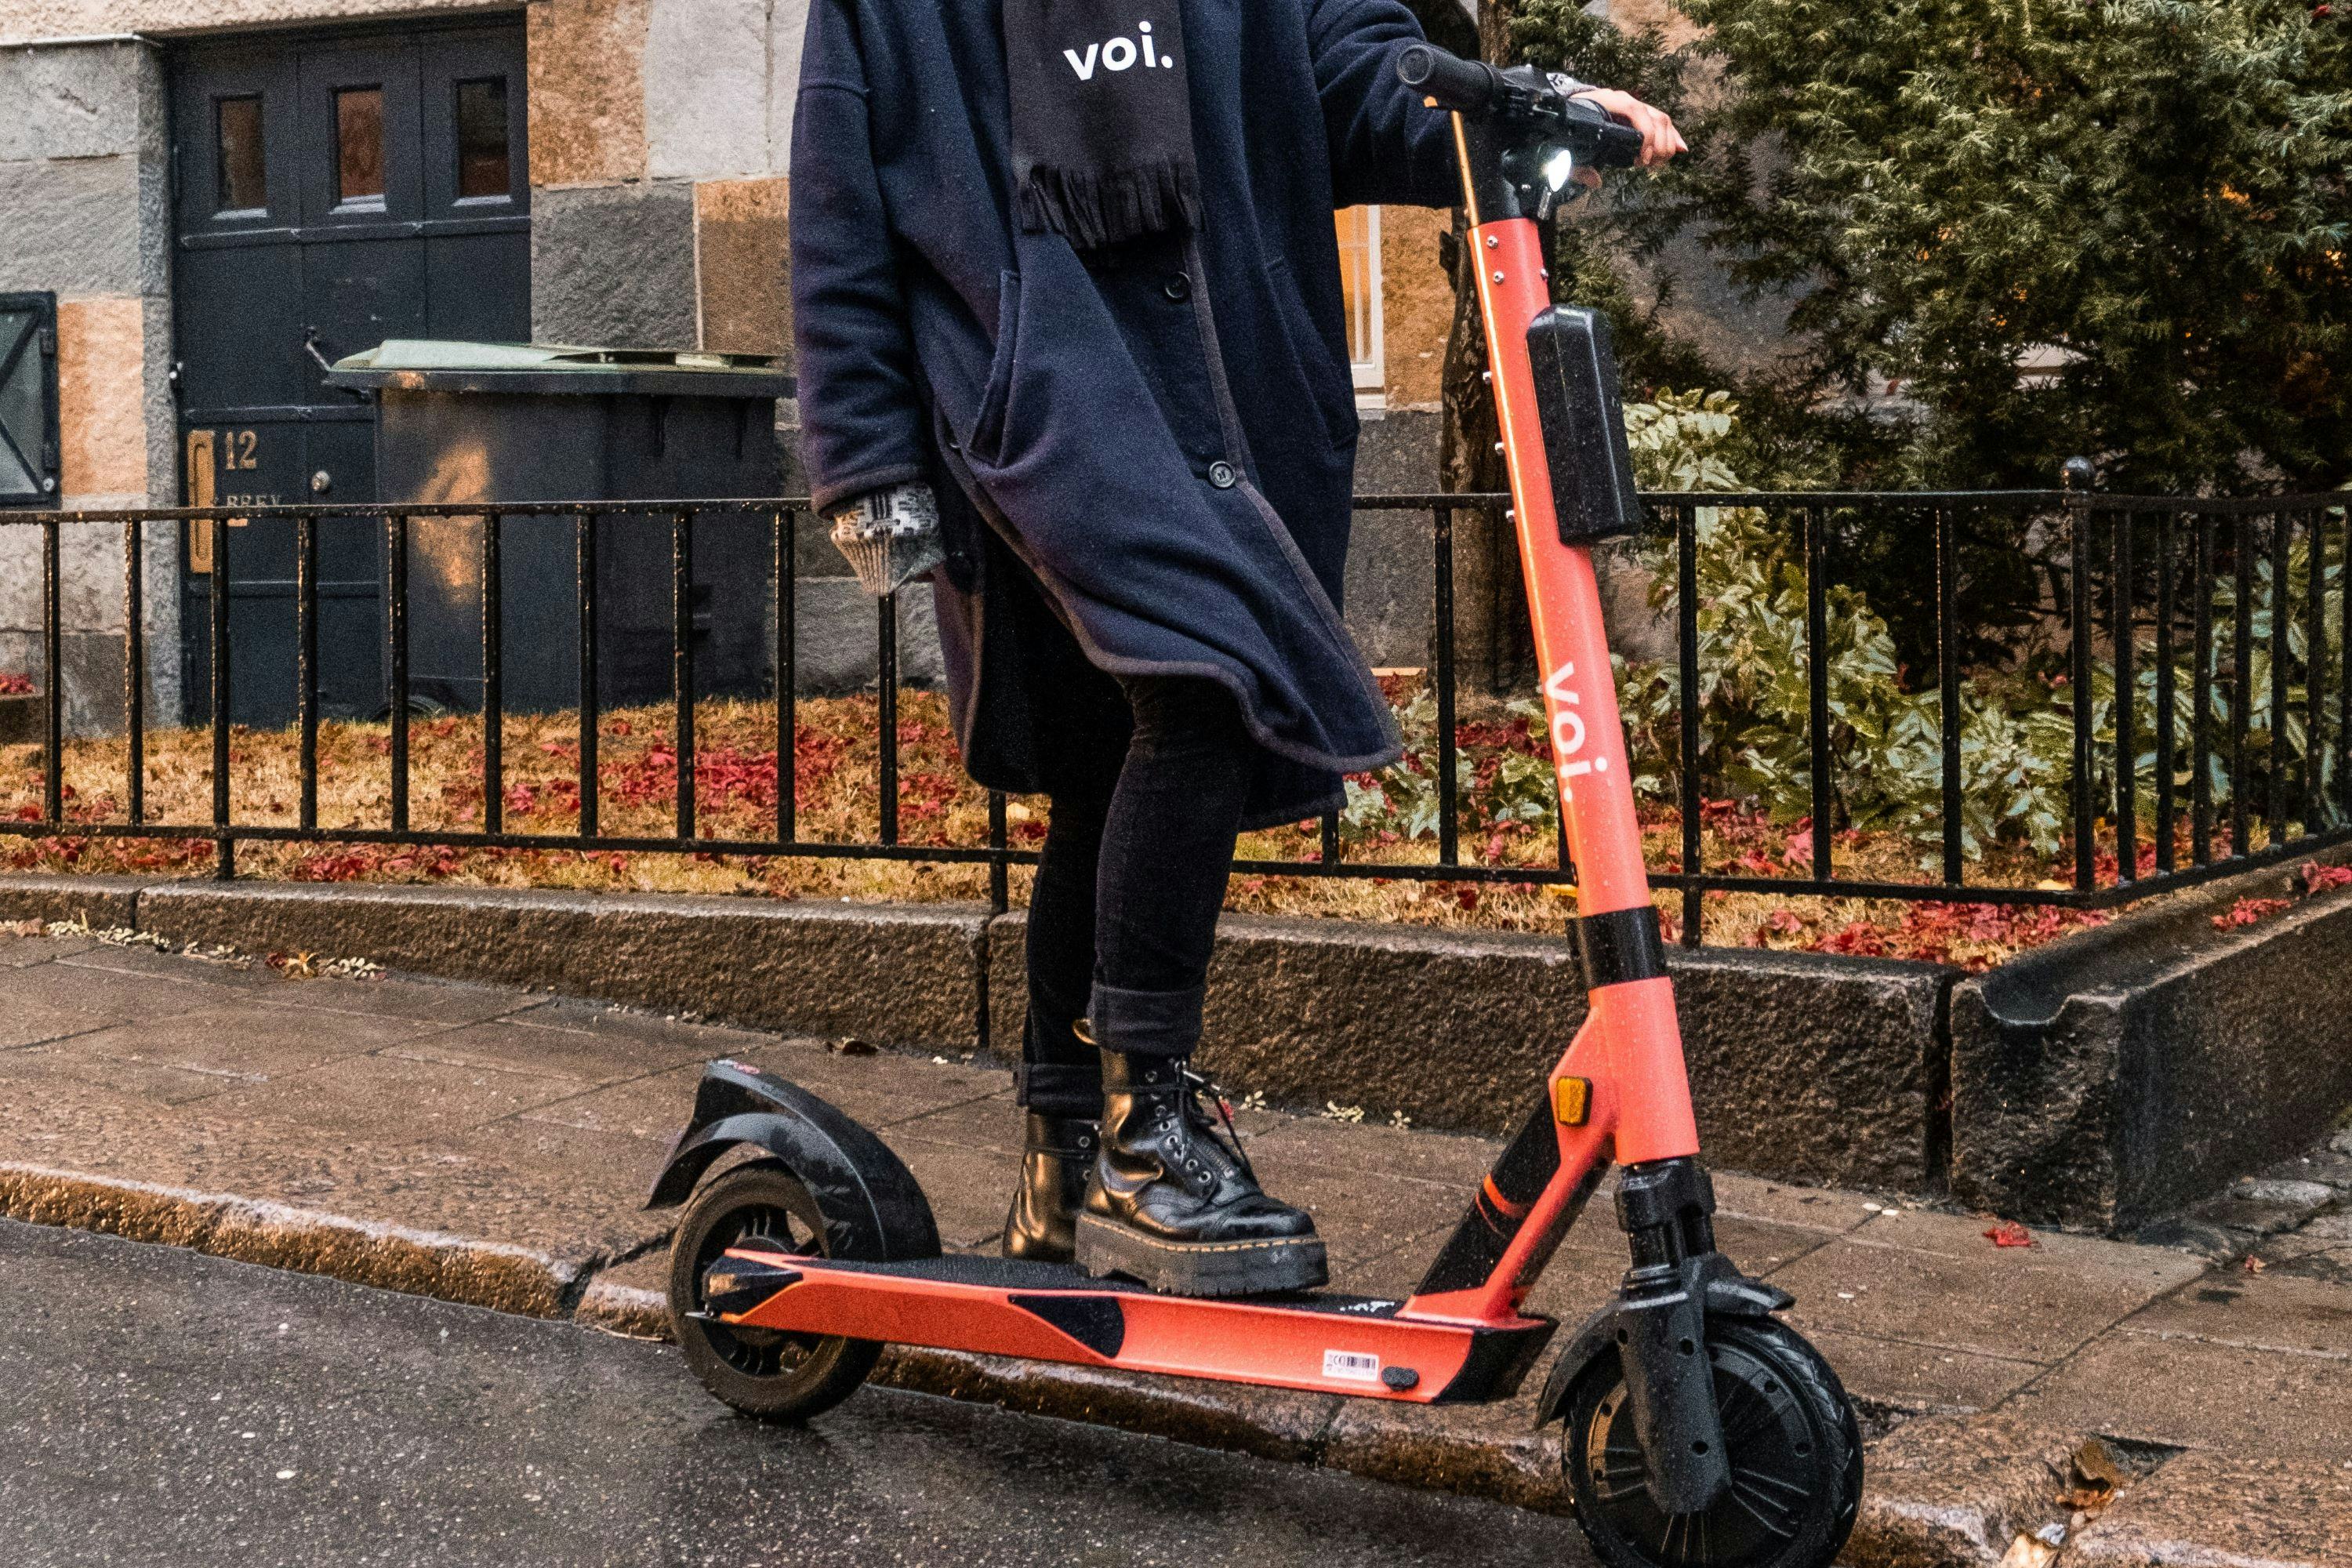 The UK looks set to allow shared e-scooters on cycle paths and roads from this summer. - Photo Voi 